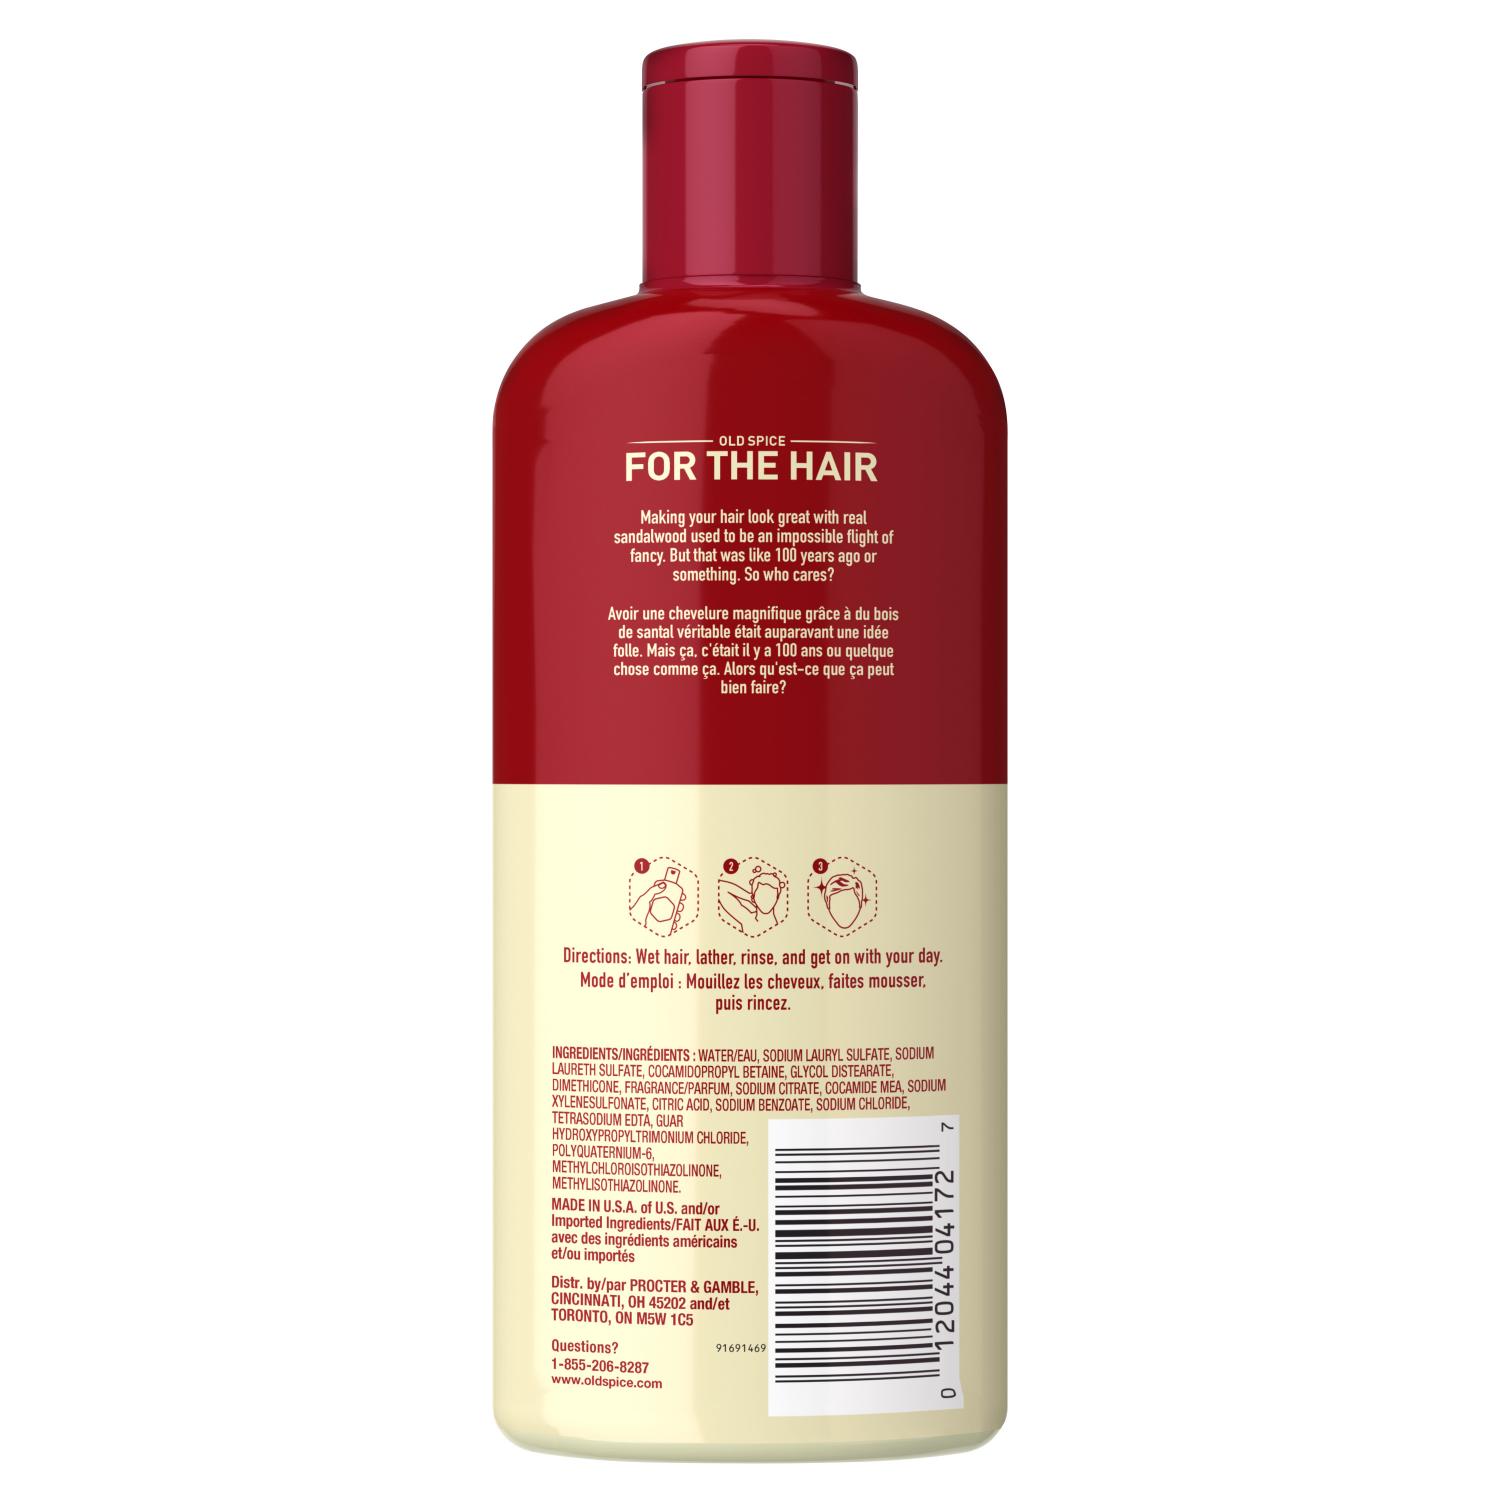 Old Spice Timber with Mint 2 in 1 Shampoo and Conditioner 12 fl oz